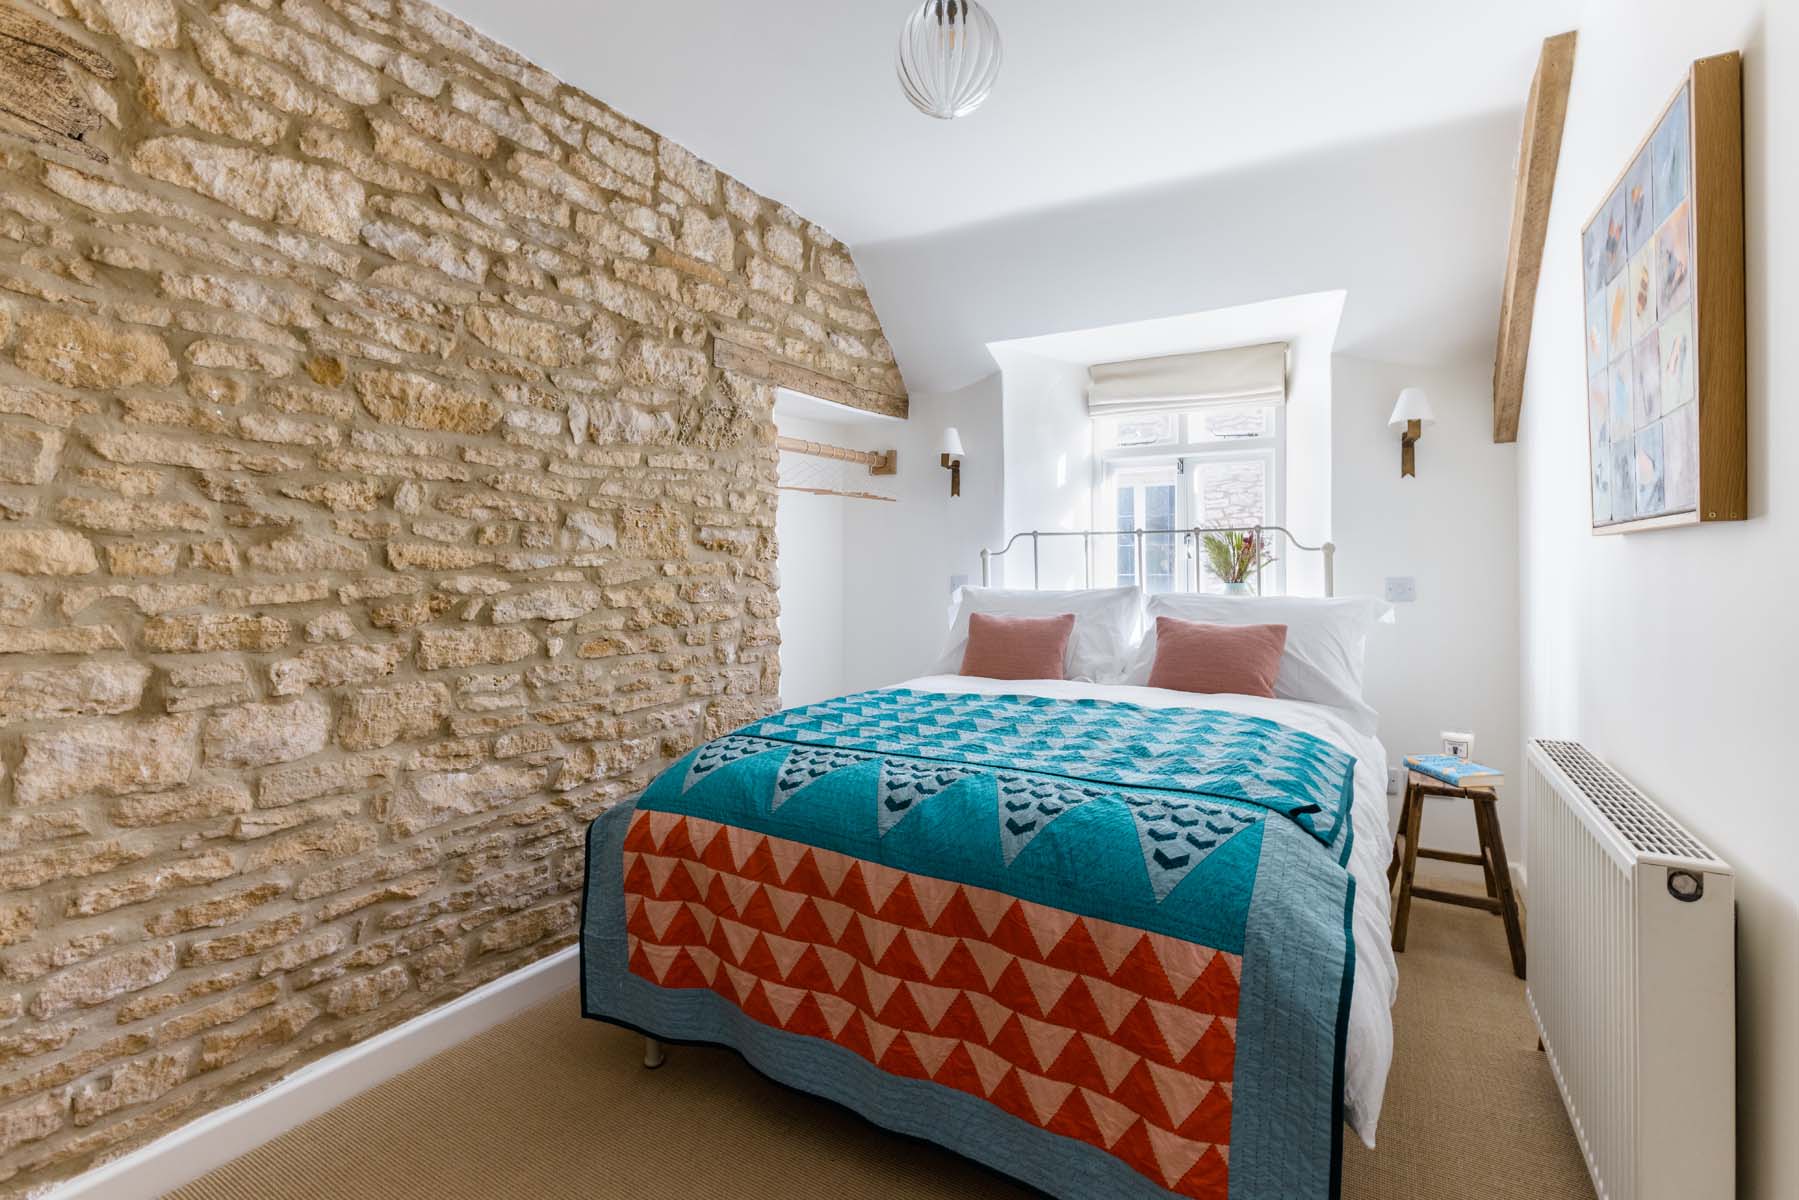 Double bedroom with colourful quilt and exposed brick wall